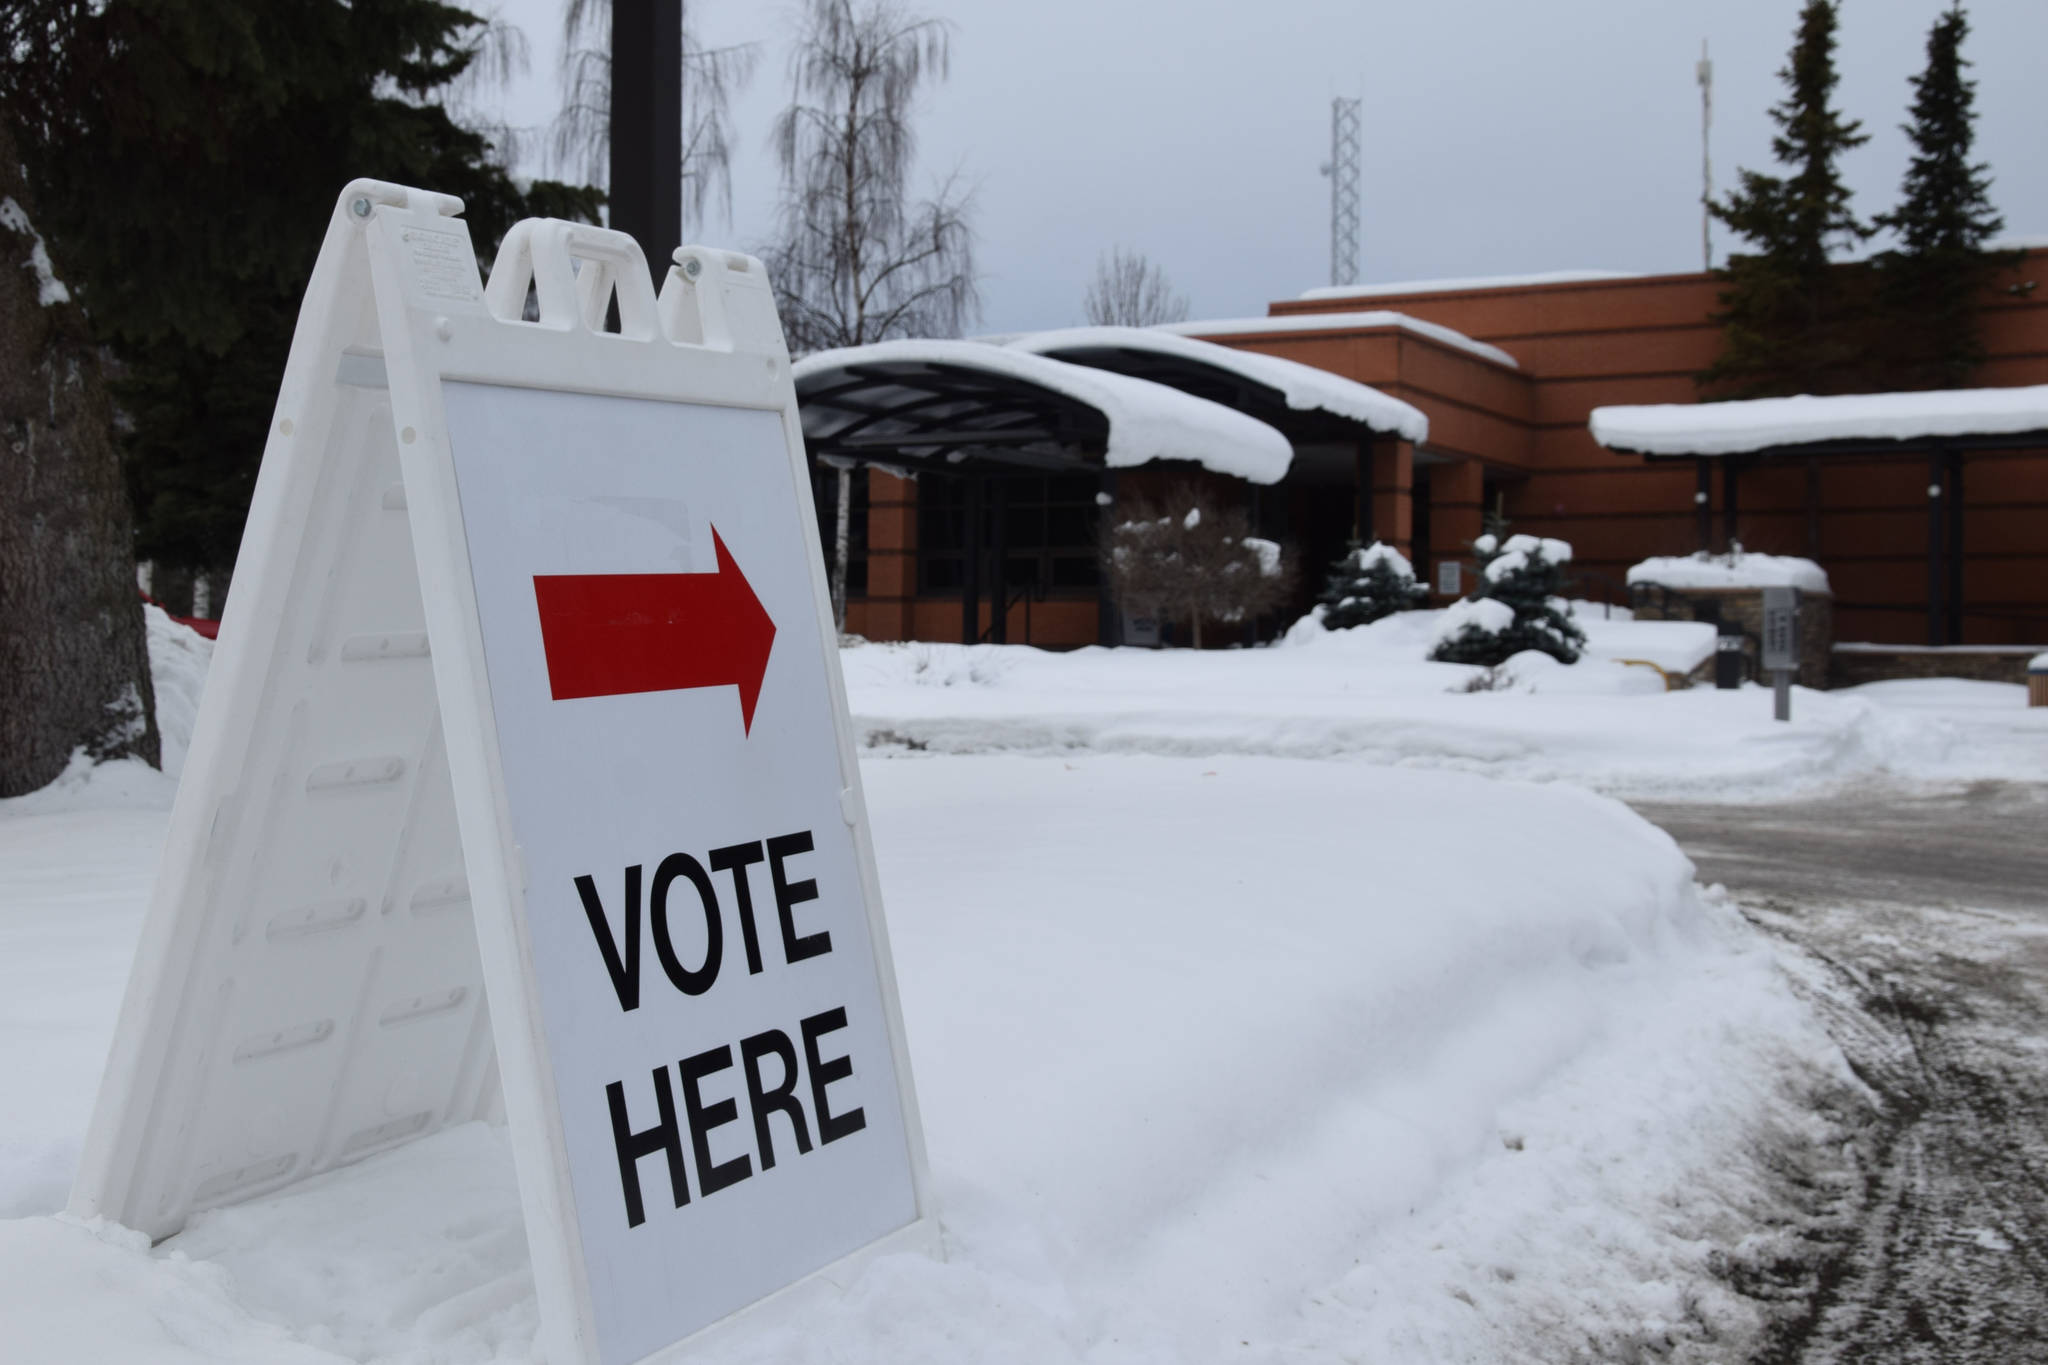 A sign directing voters to the polling place sits outside city hall in Soldotna on March 5, 2019. (Photo by Brian Mazurek/Peninsula Clarion)